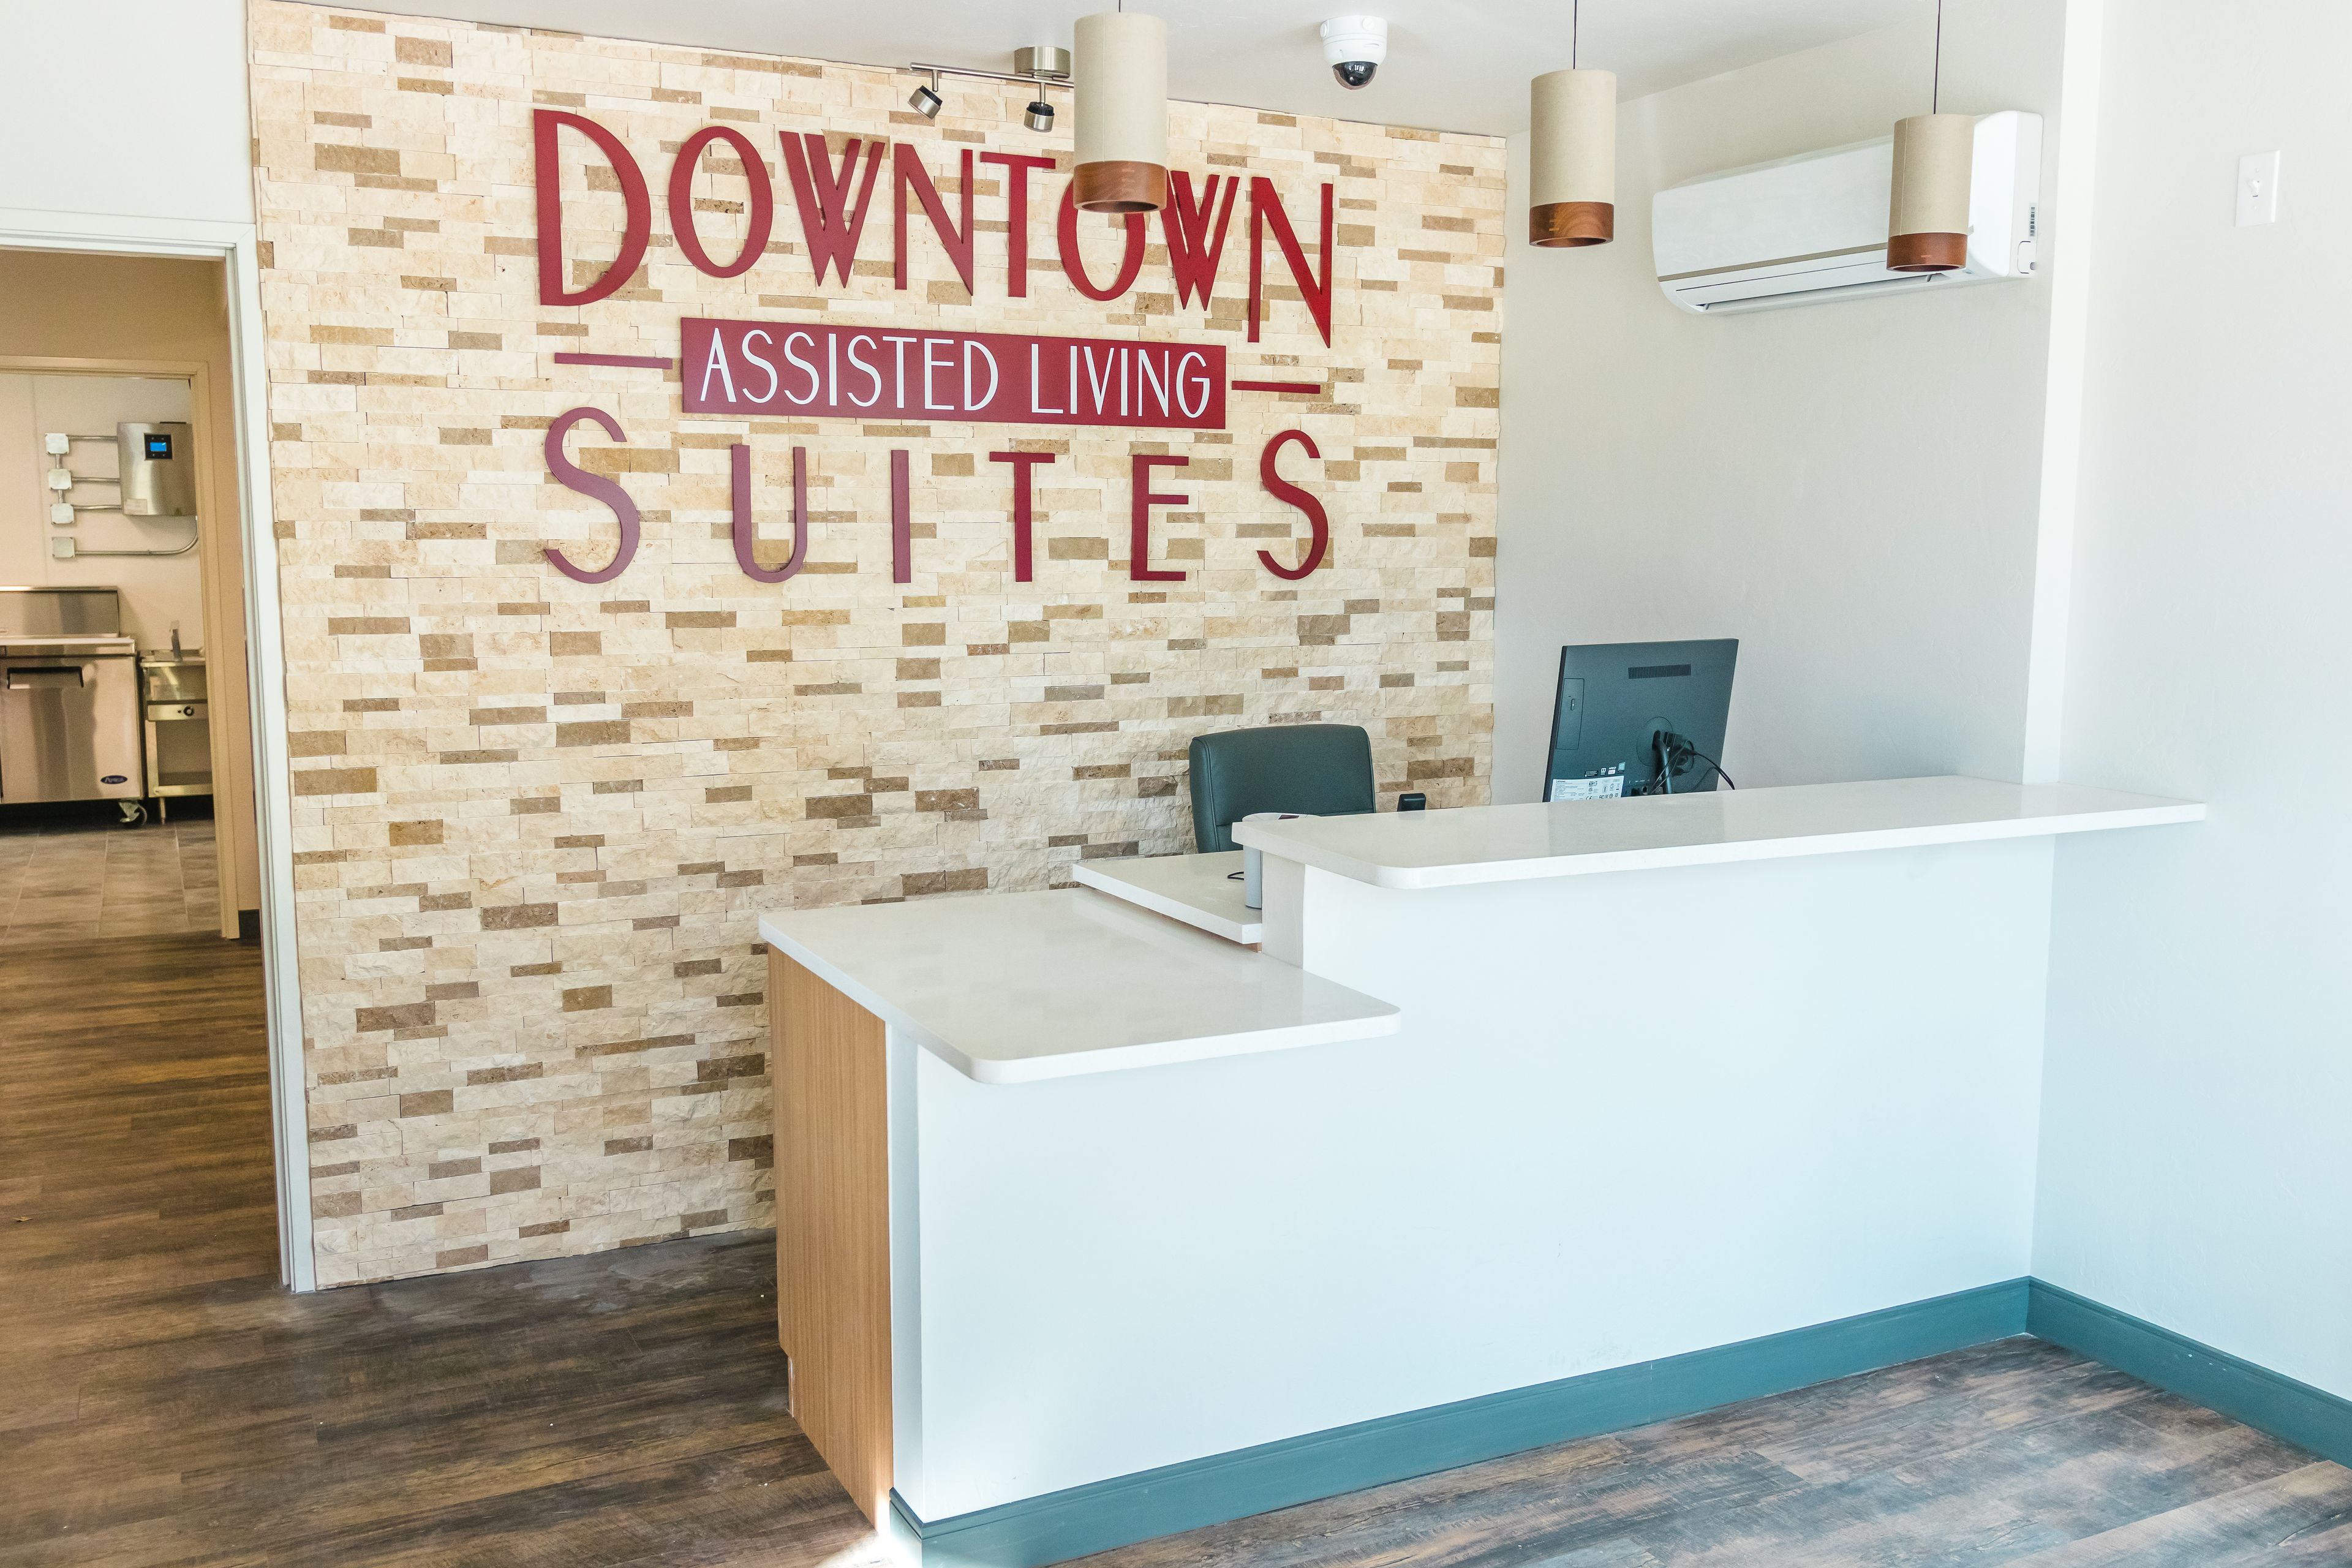 Downtown Assisted Living Suites 3